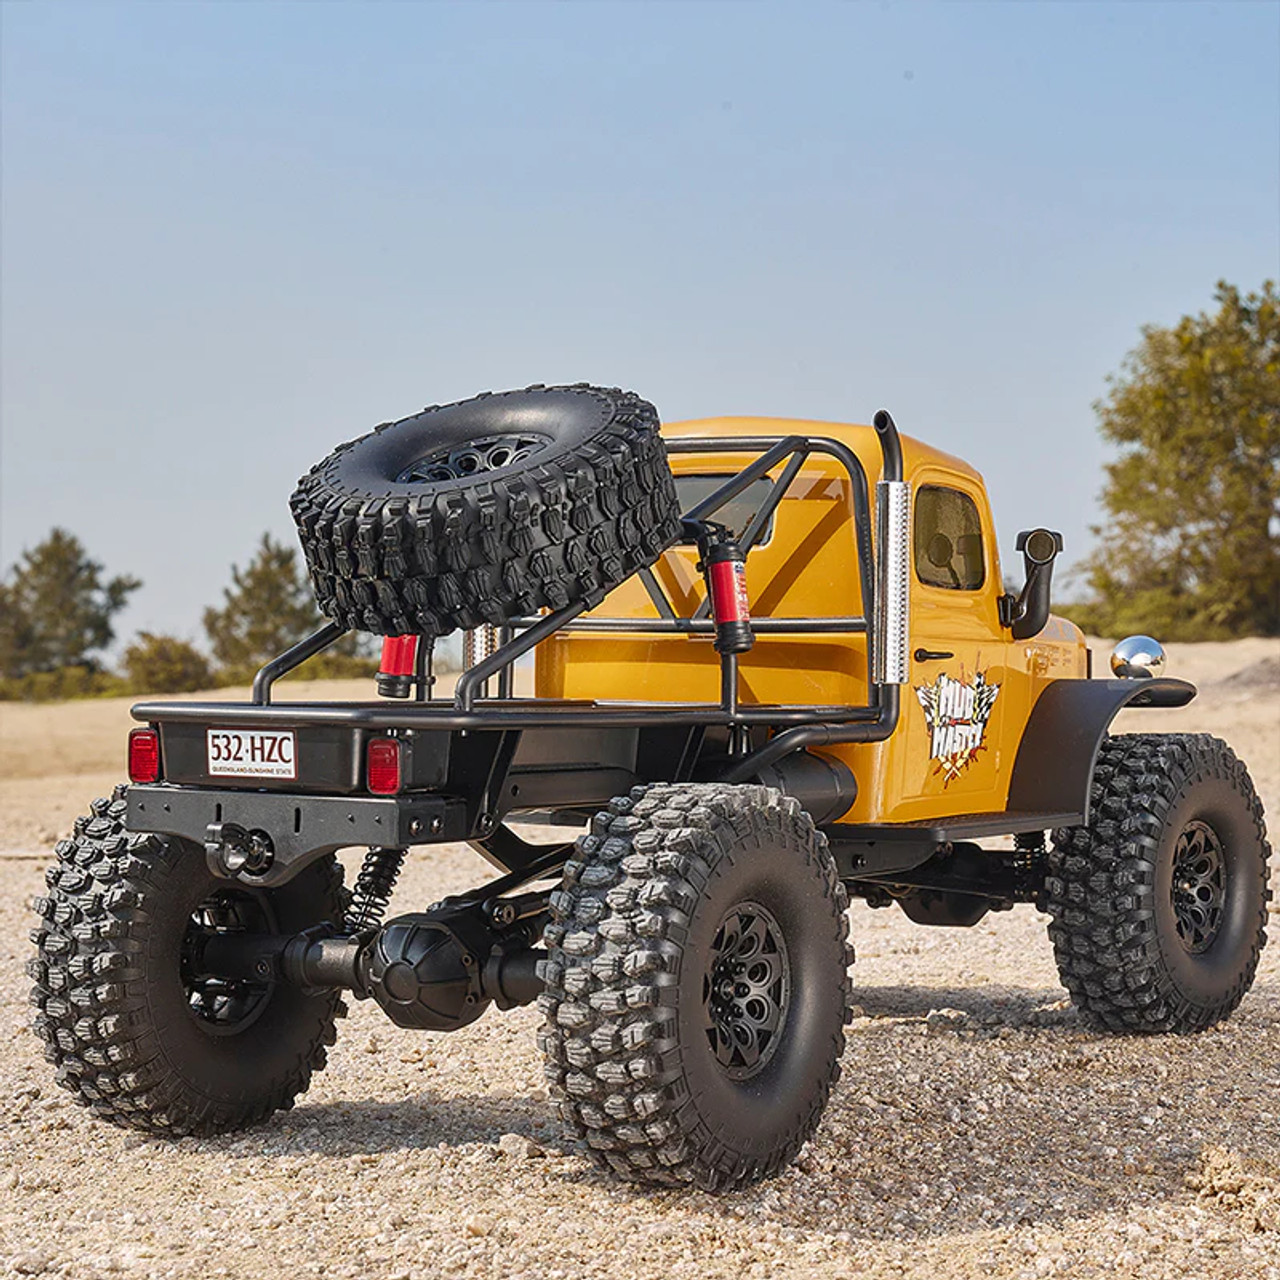 FMS 1:10 Atlas 4x4 Off-Road Truck RS, Yellow